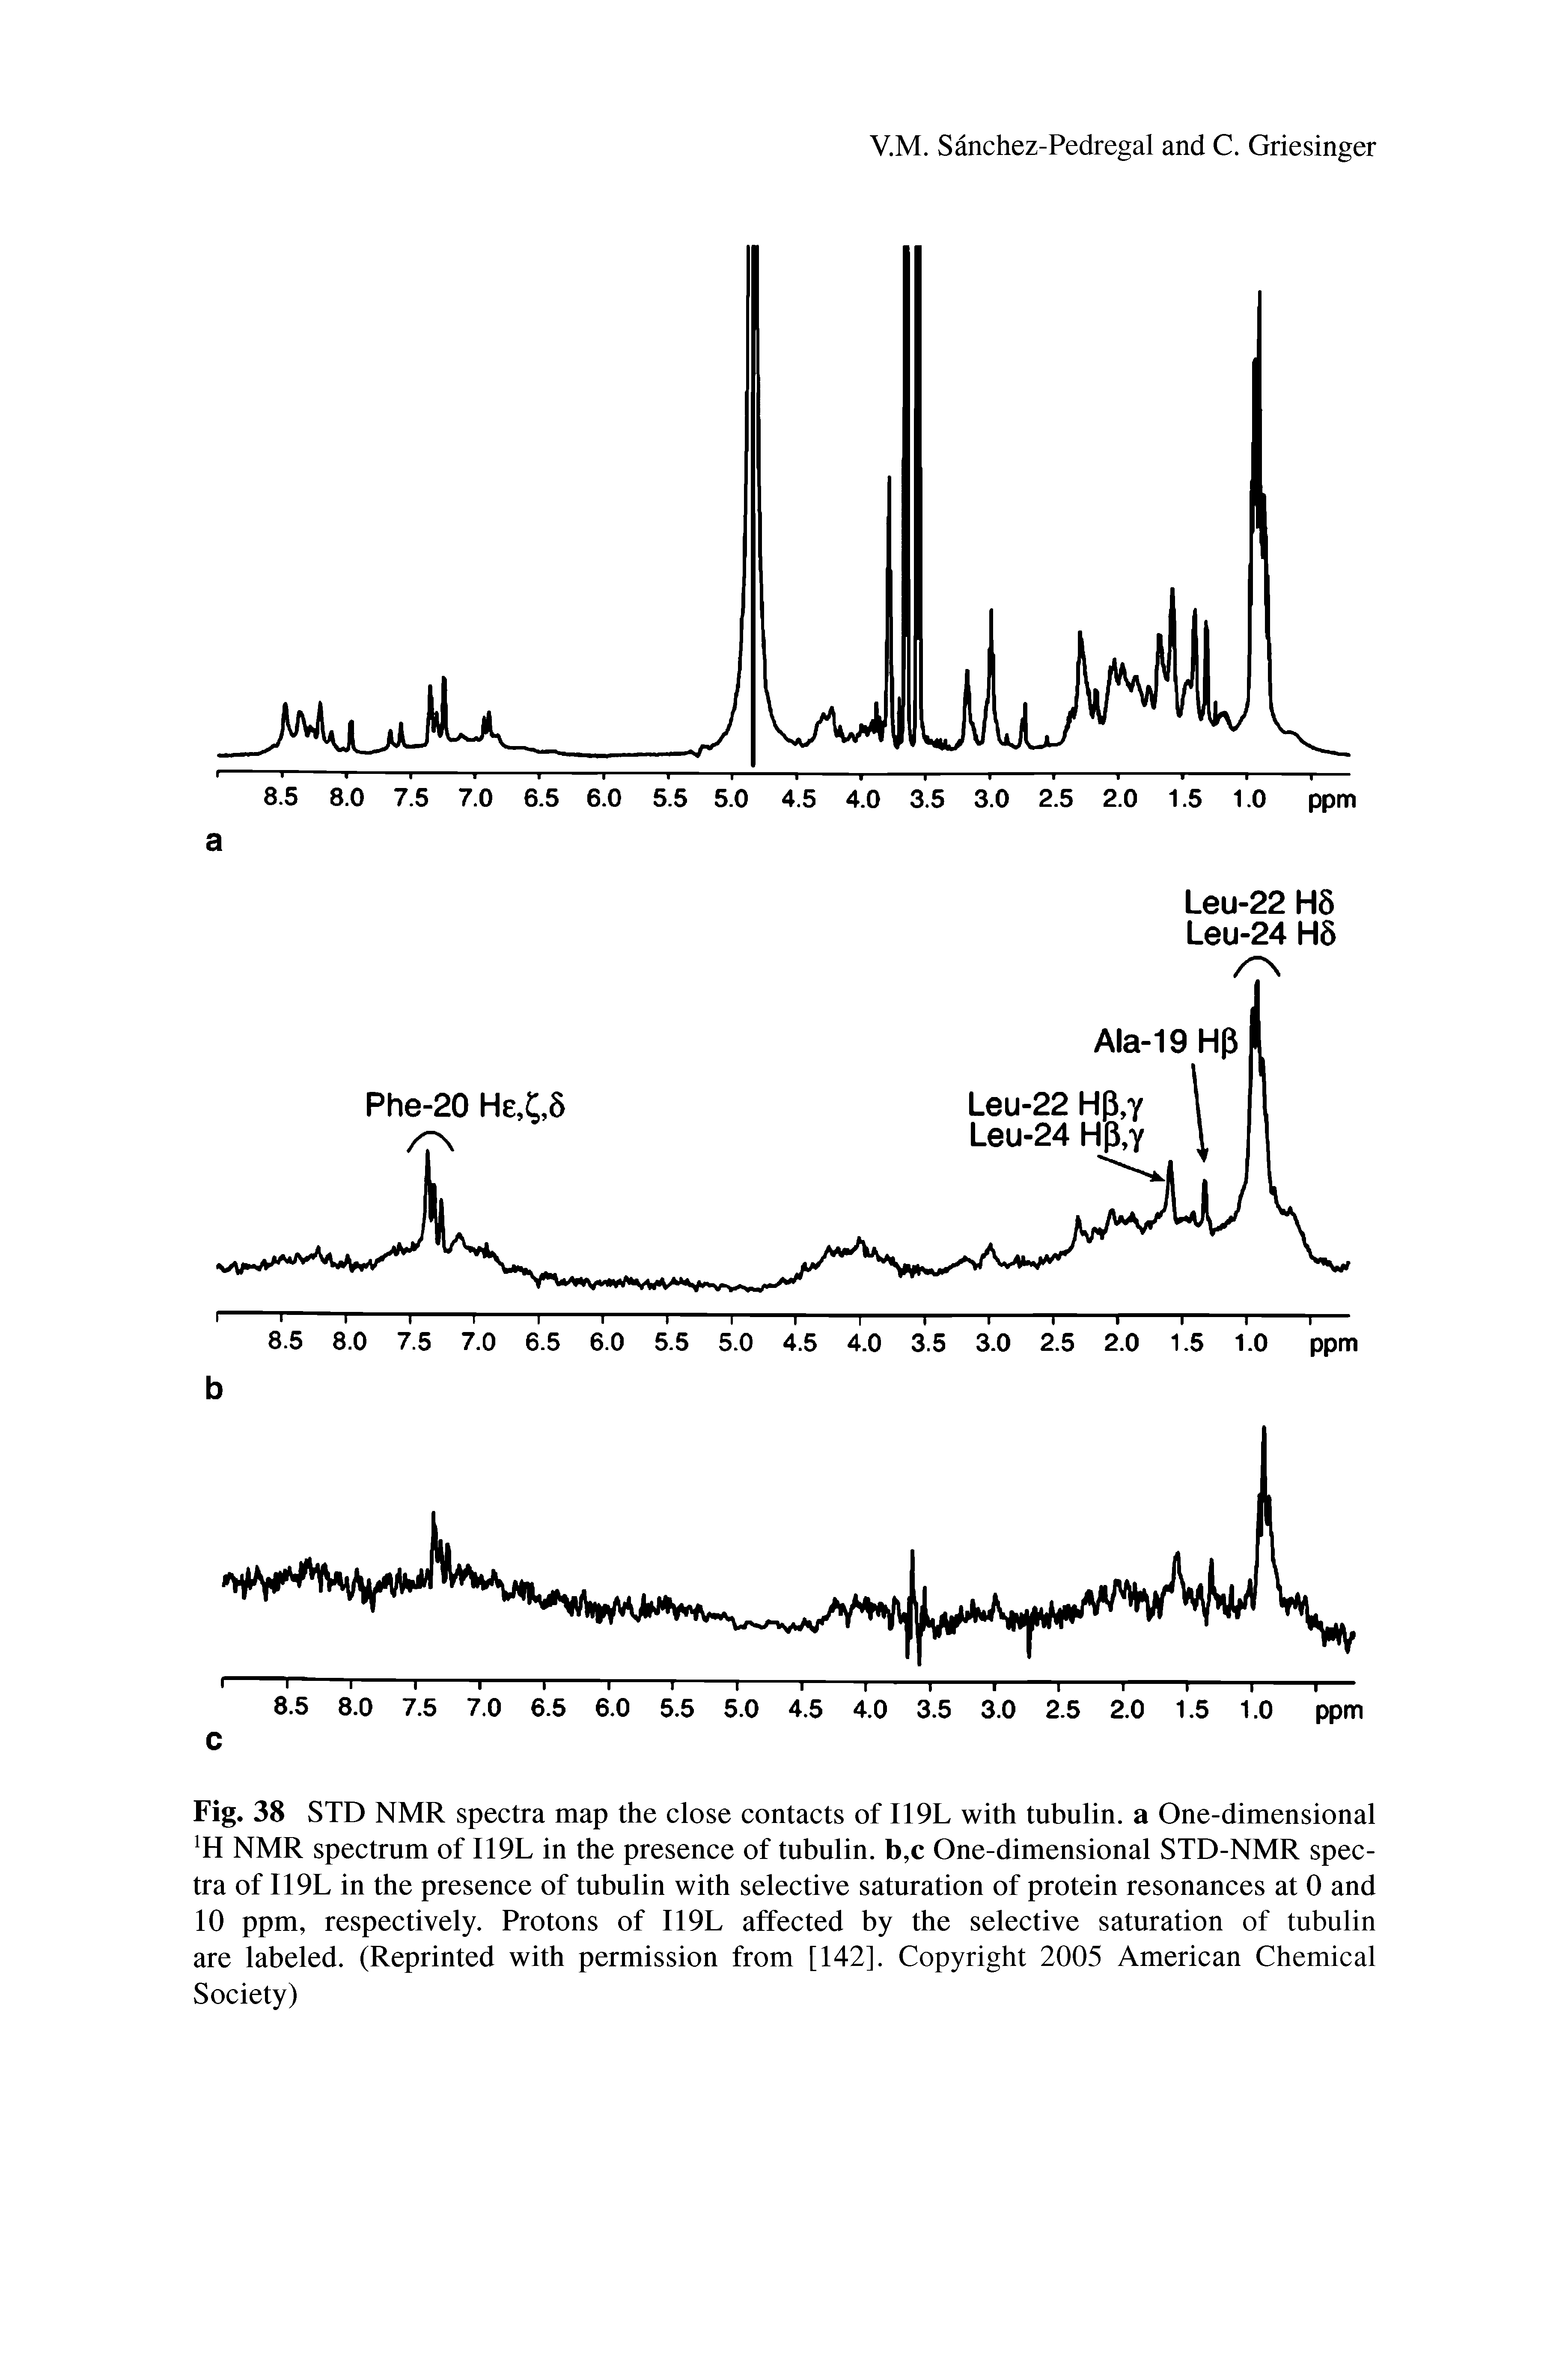 Fig. 38 STD NMR spectra map the close contacts of I19L with tubulin, a One-dimensional lH NMR spectrum of I19L in the presence of tubulin. b,c One-dimensional STD-NMR spectra of I19L in the presence of tubulin with selective saturation of protein resonances at 0 and 10 ppm, respectively. Protons of I19L affected by the selective saturation of tubulin are labeled. (Reprinted with permission from [142]. Copyright 2005 American Chemical Society)...